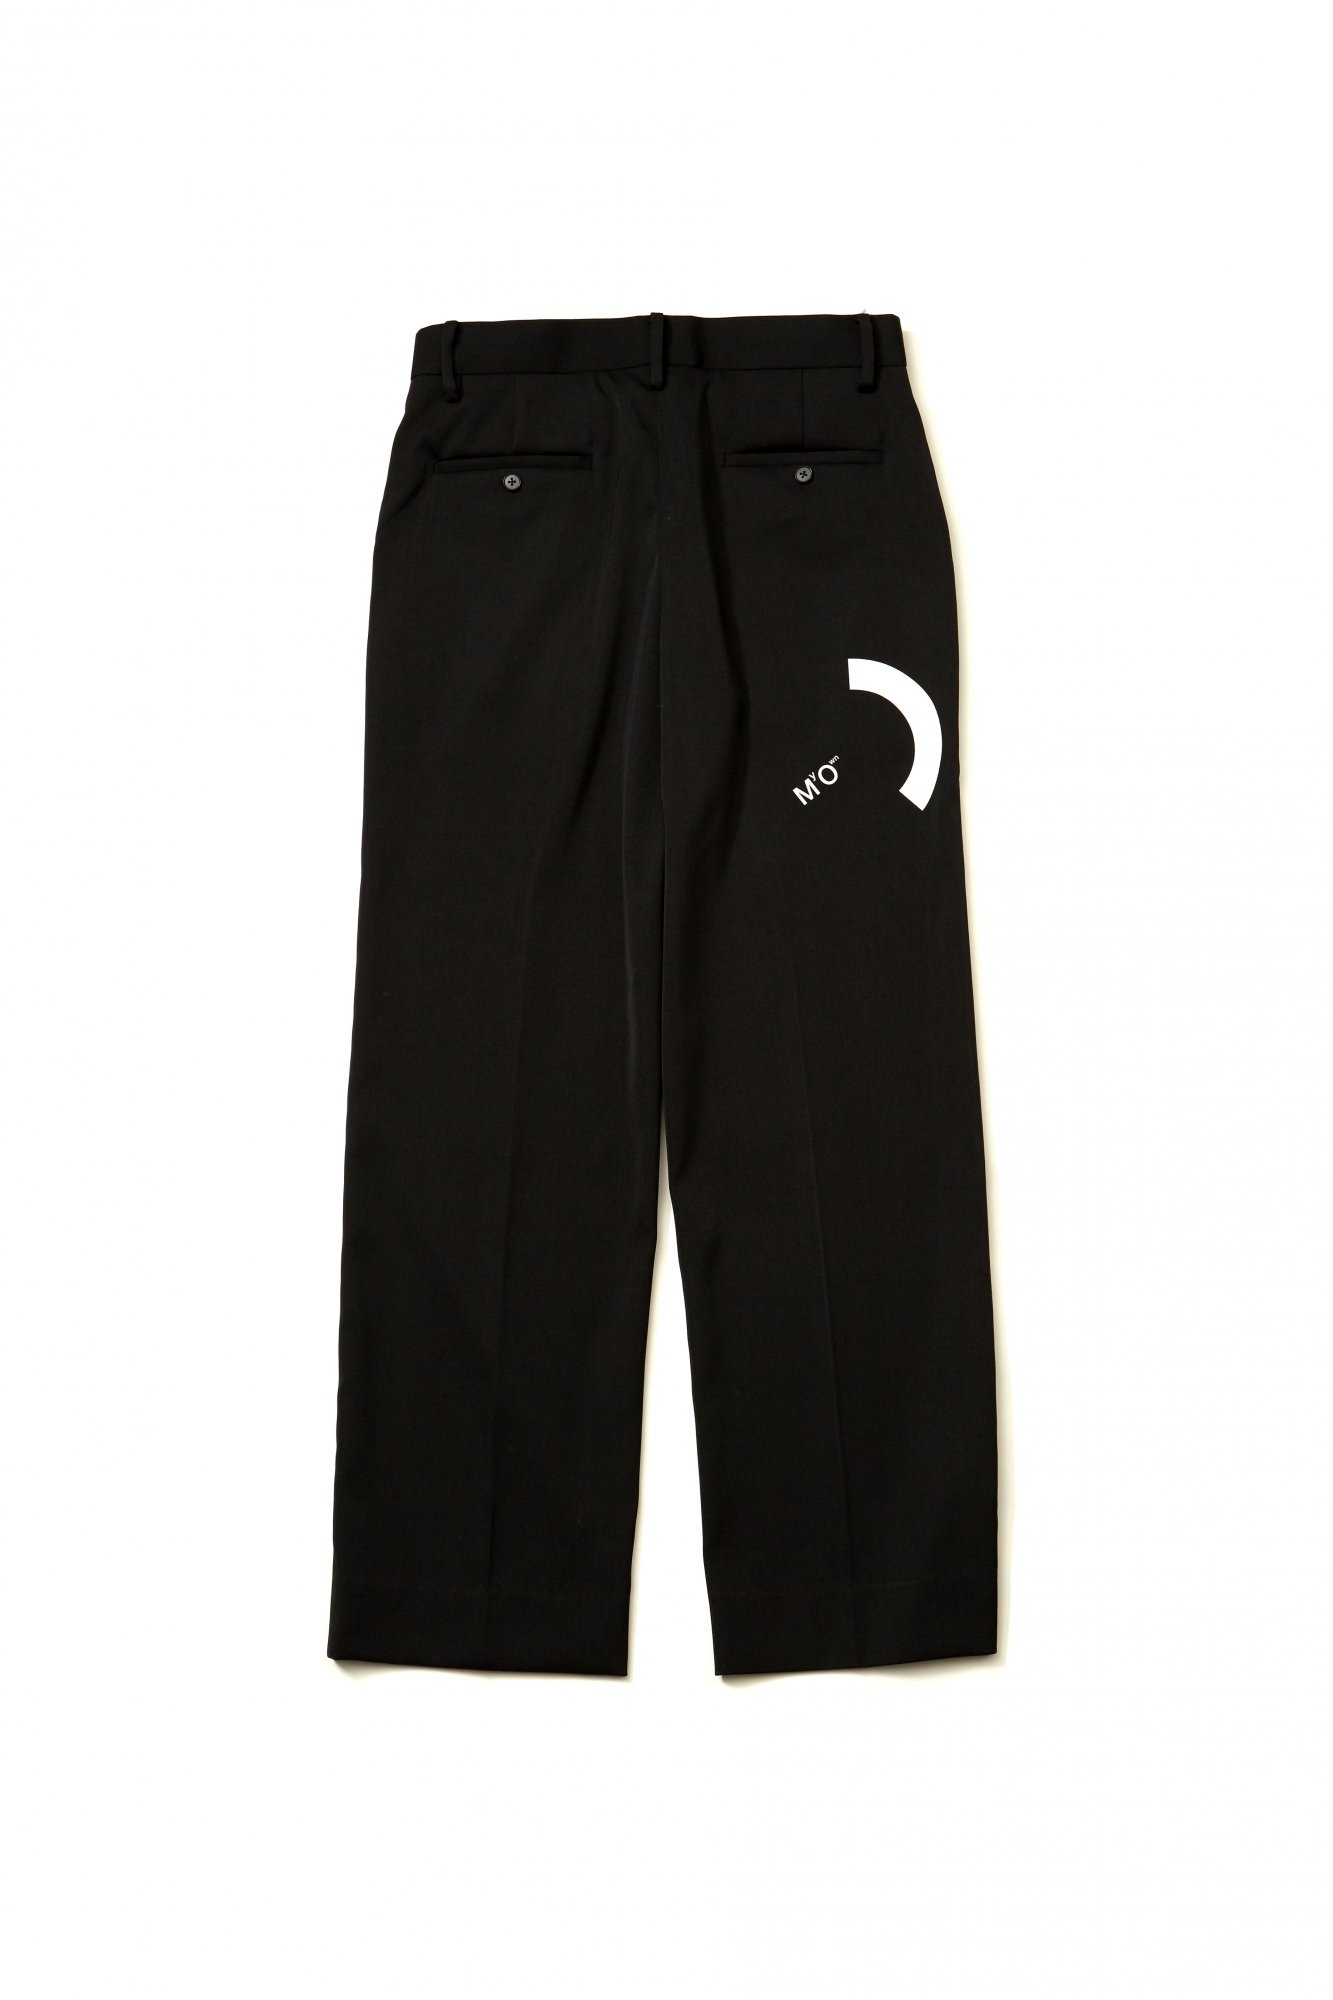 soe<br />[40%off] Relaxed Fit Trousers NINETEEN EIGHTY-FOUR<img class='new_mark_img2' src='https://img.shop-pro.jp/img/new/icons20.gif' style='border:none;display:inline;margin:0px;padding:0px;width:auto;' />